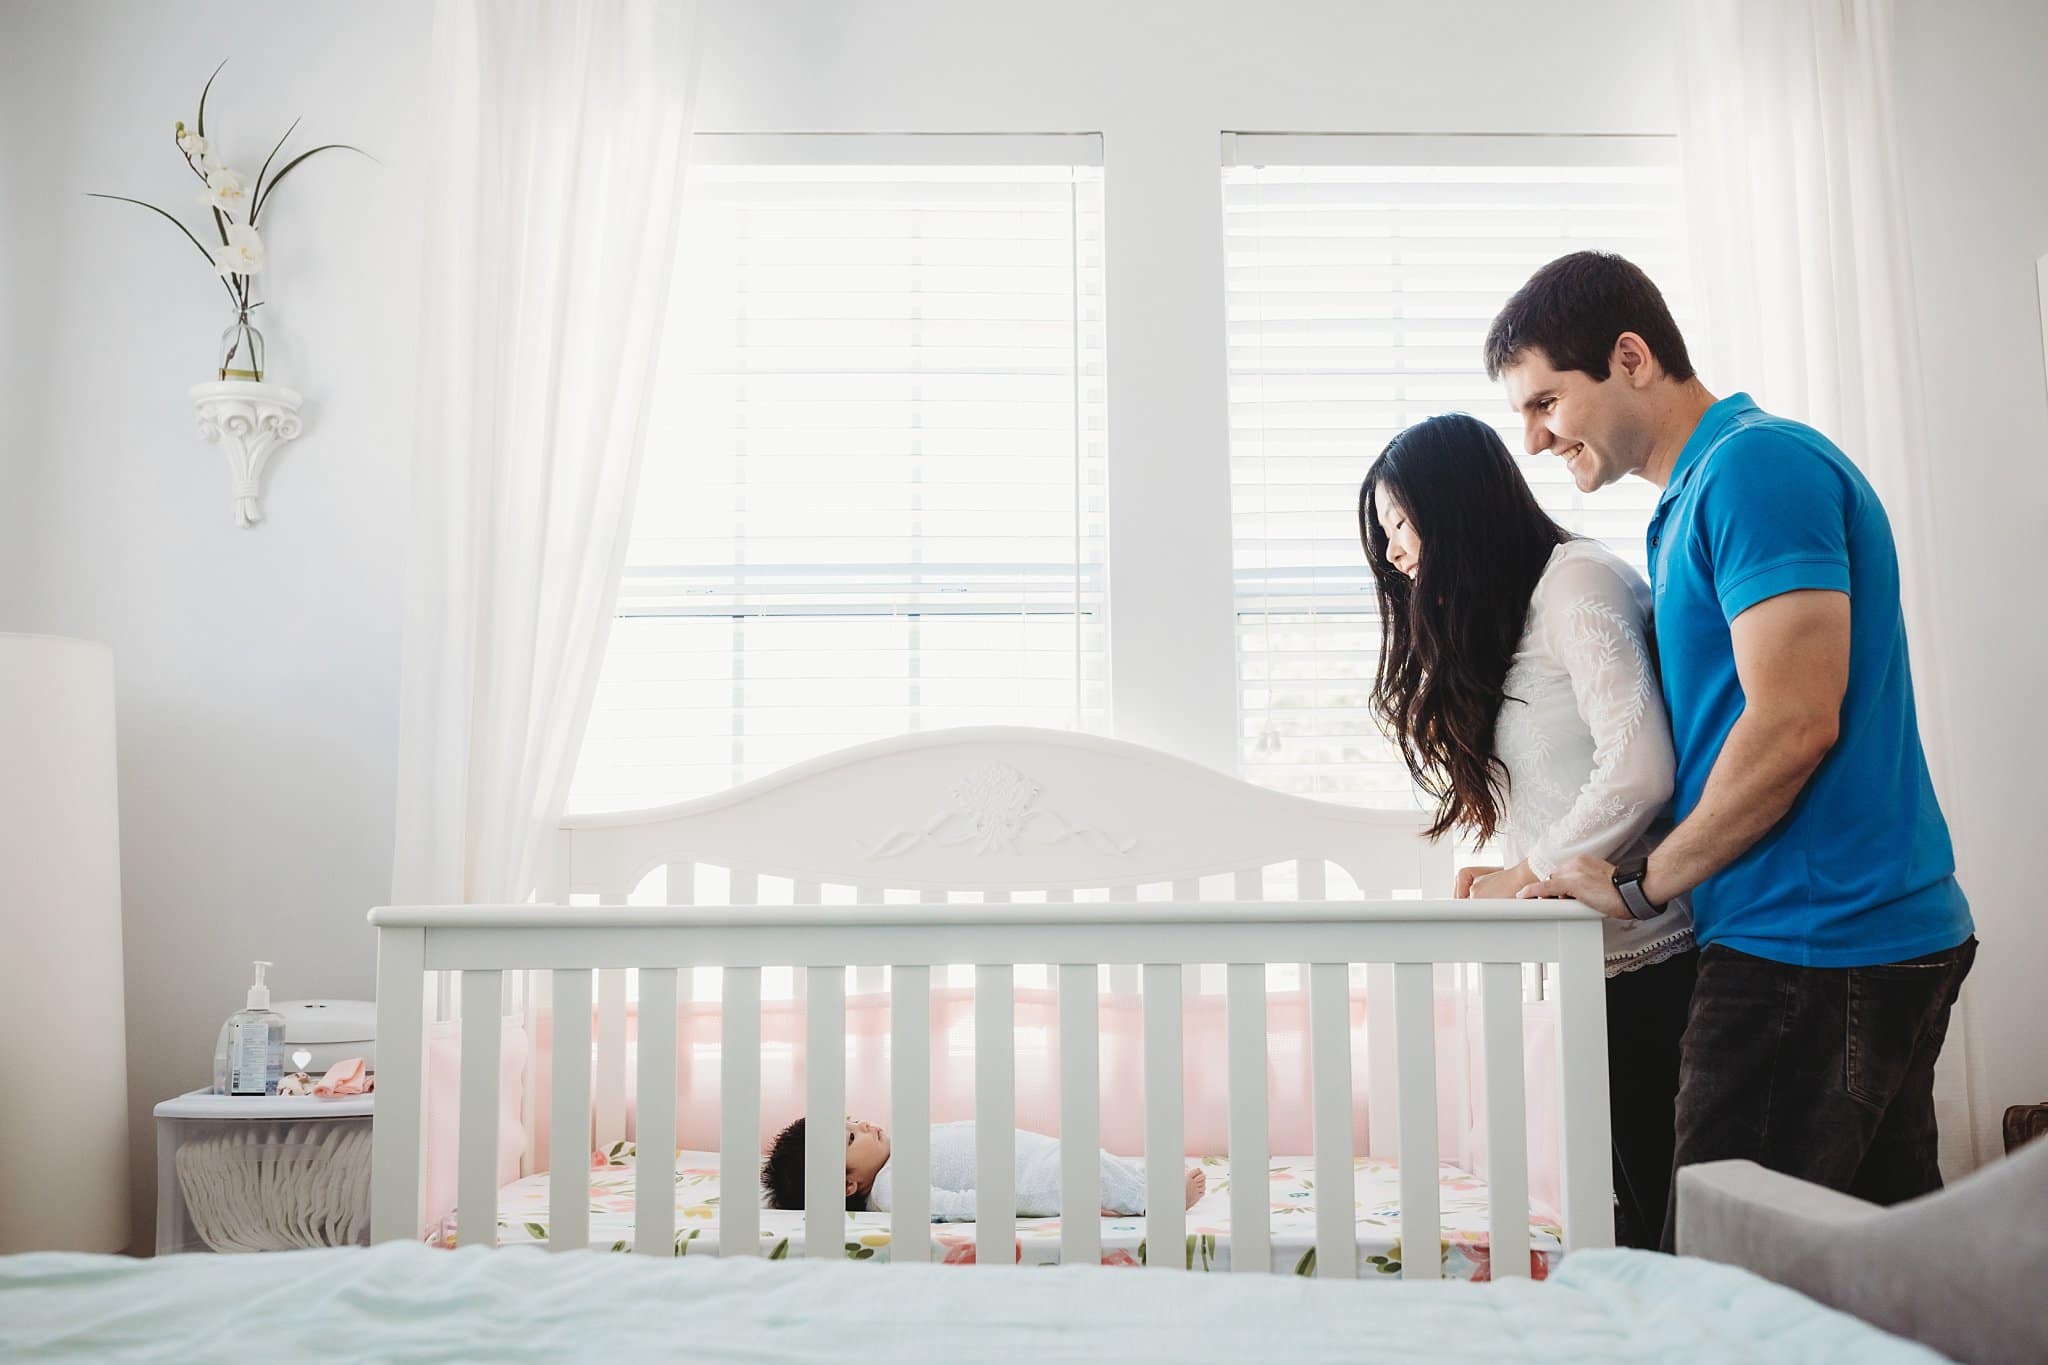 Jacksonville Photographer in home lifestyle newborn photography session mom and dad lookign at newborn baby girl in white crib with beautiful window light flowing in